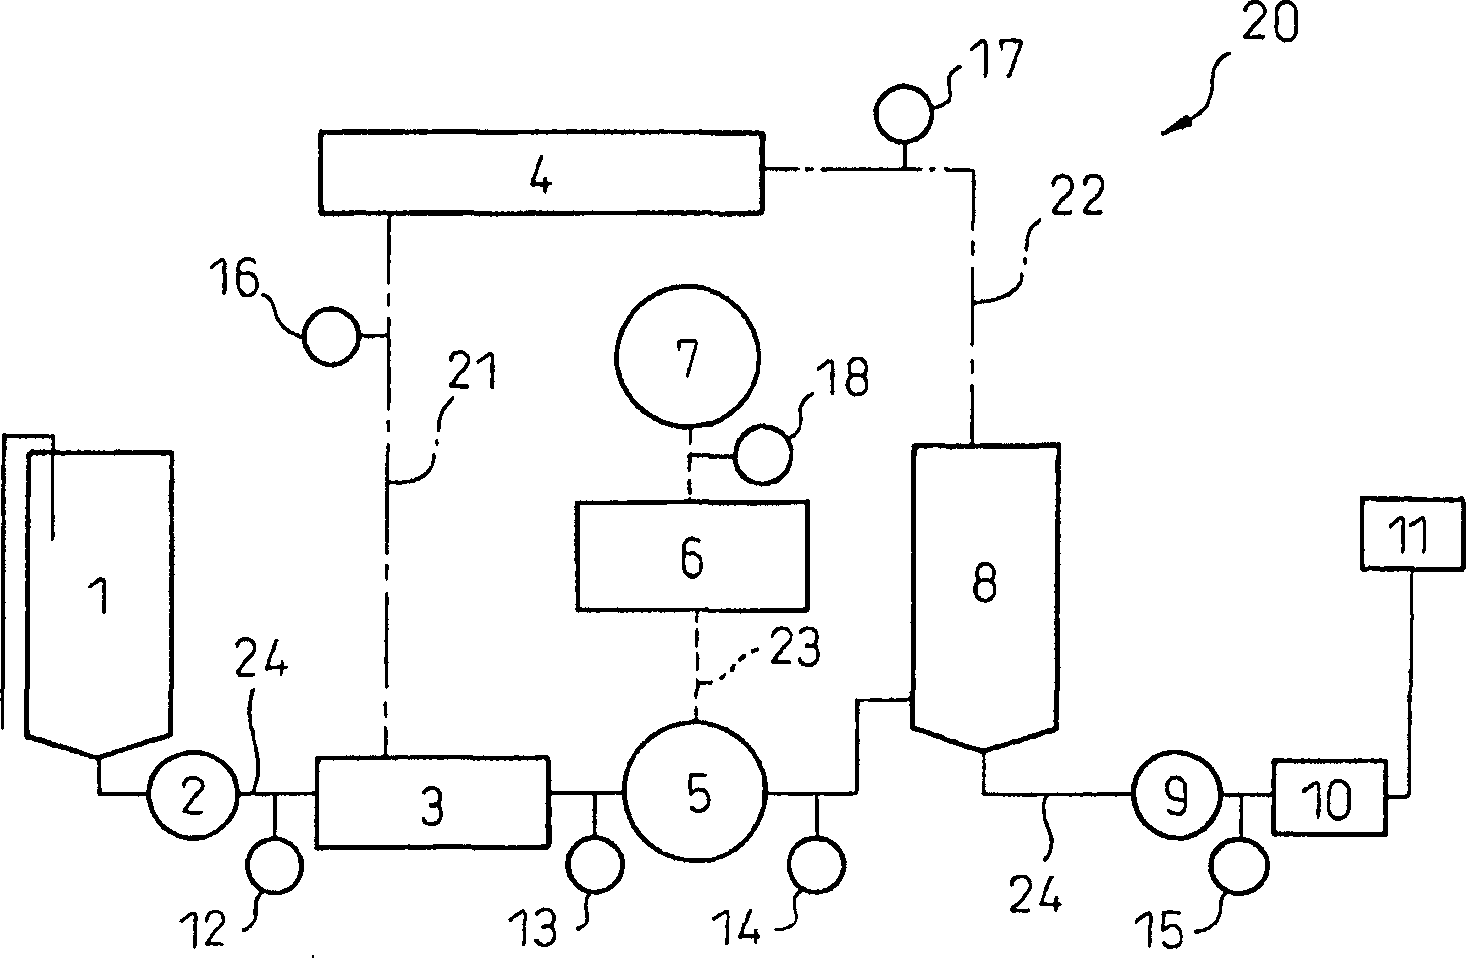 Method and apparatus for manufacturing beverage